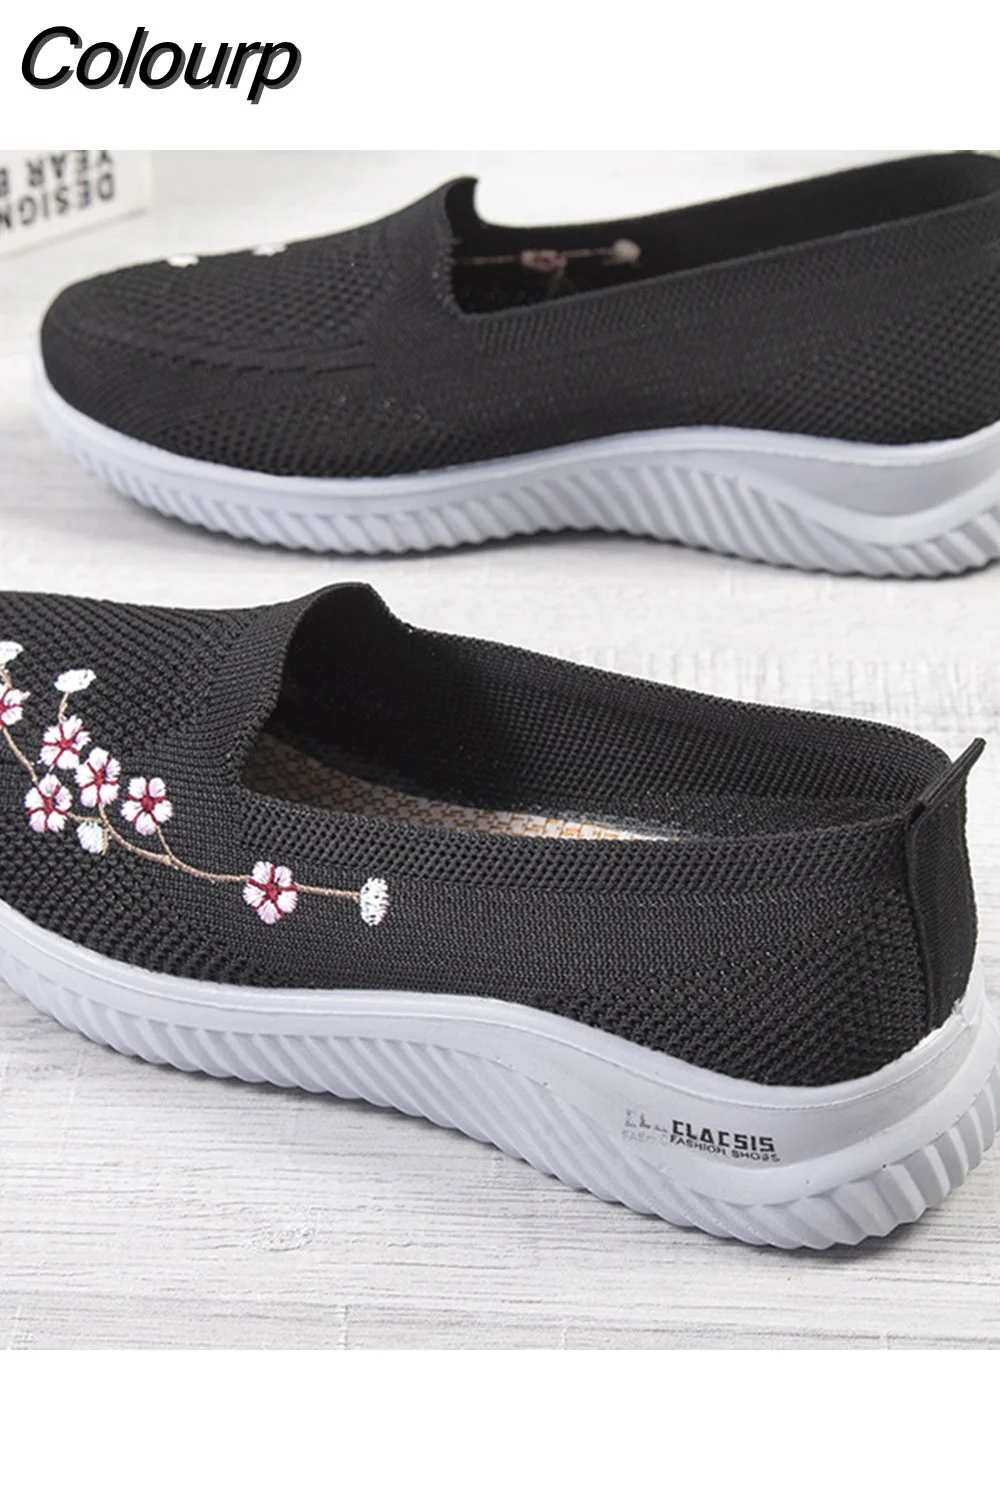 Colourp Slip-on Women Flats Shoes Fashion All-match Female Sneakers Soft Comfort Walking Shoes Lightweight Breathable